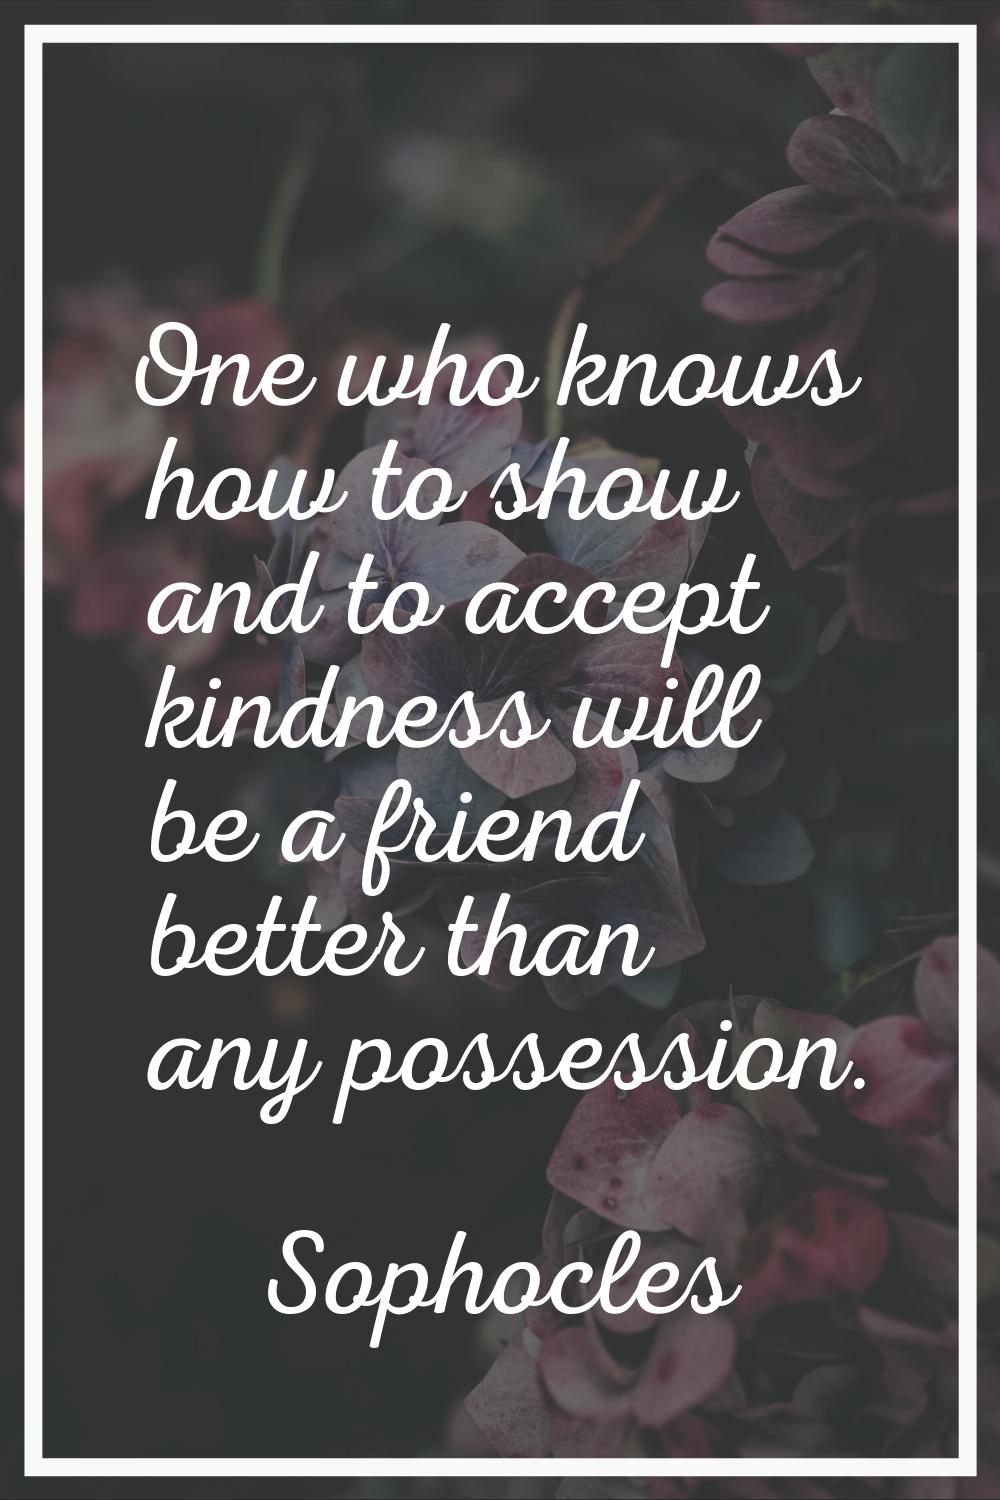 One who knows how to show and to accept kindness will be a friend better than any possession.